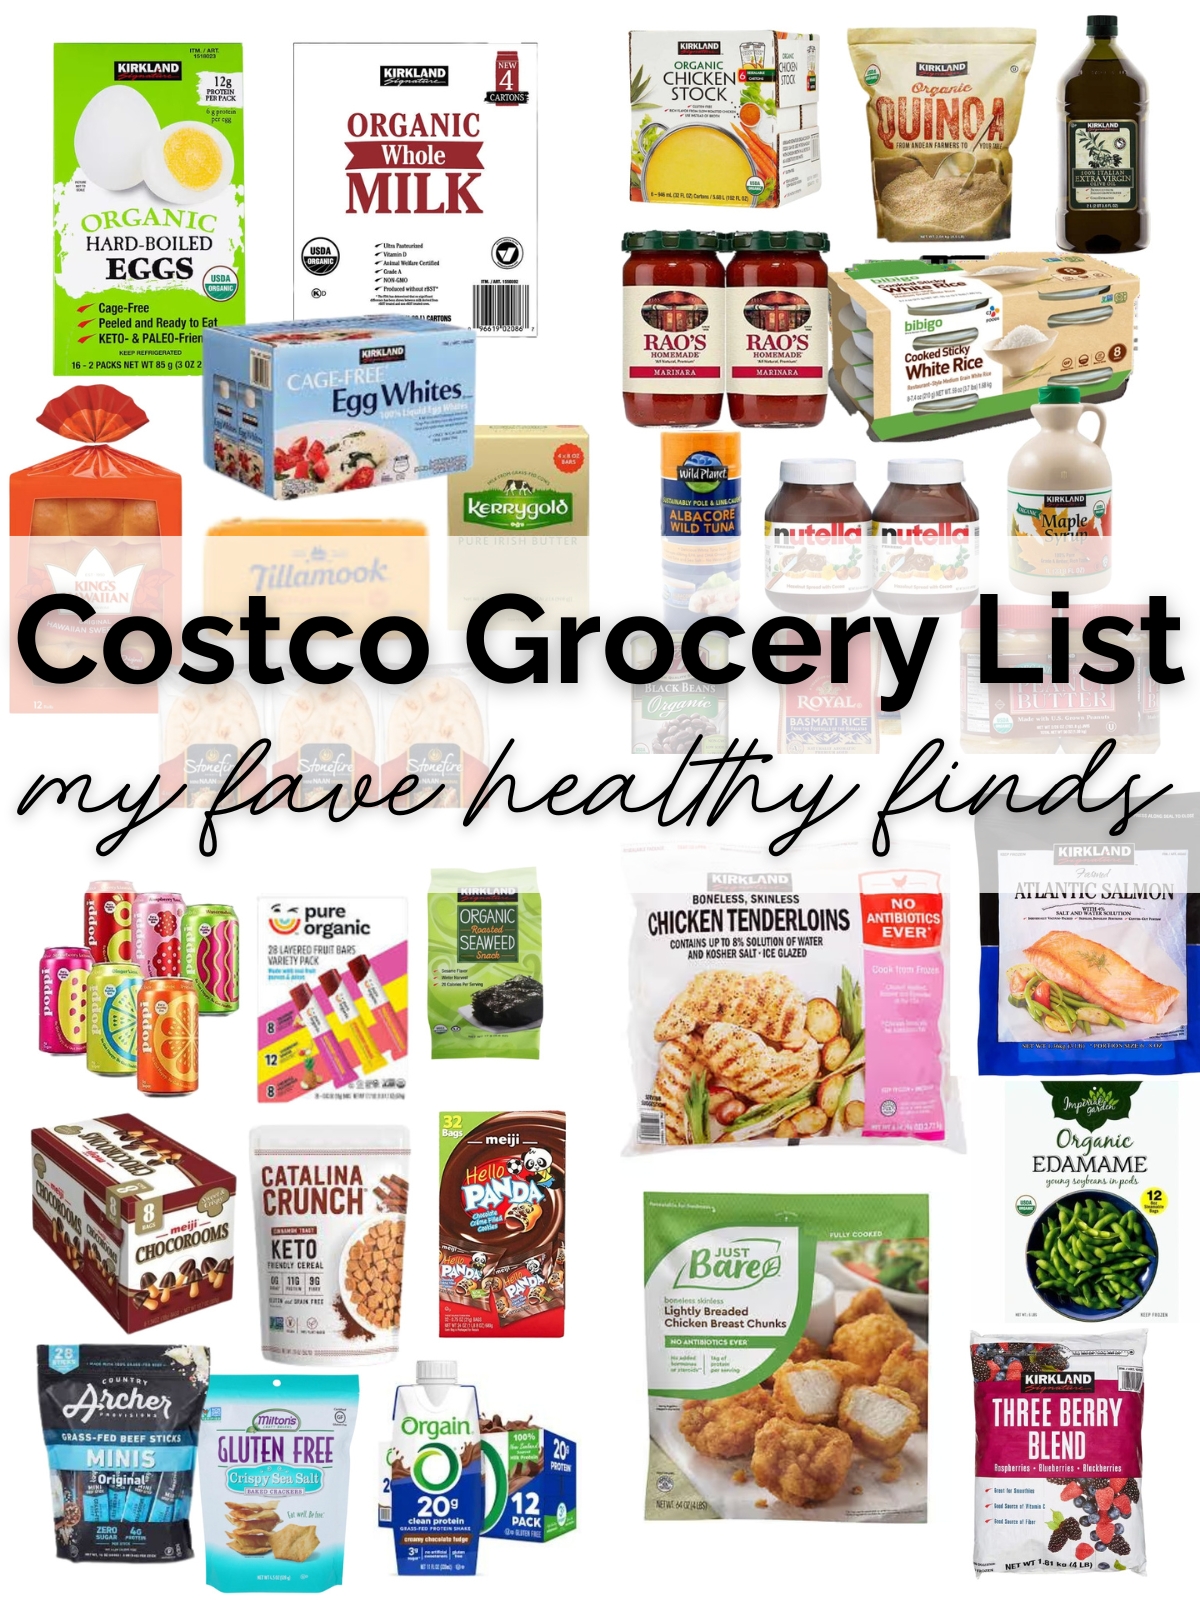 My Top 25 Favorite Items to Buy at Costco, H. Prall